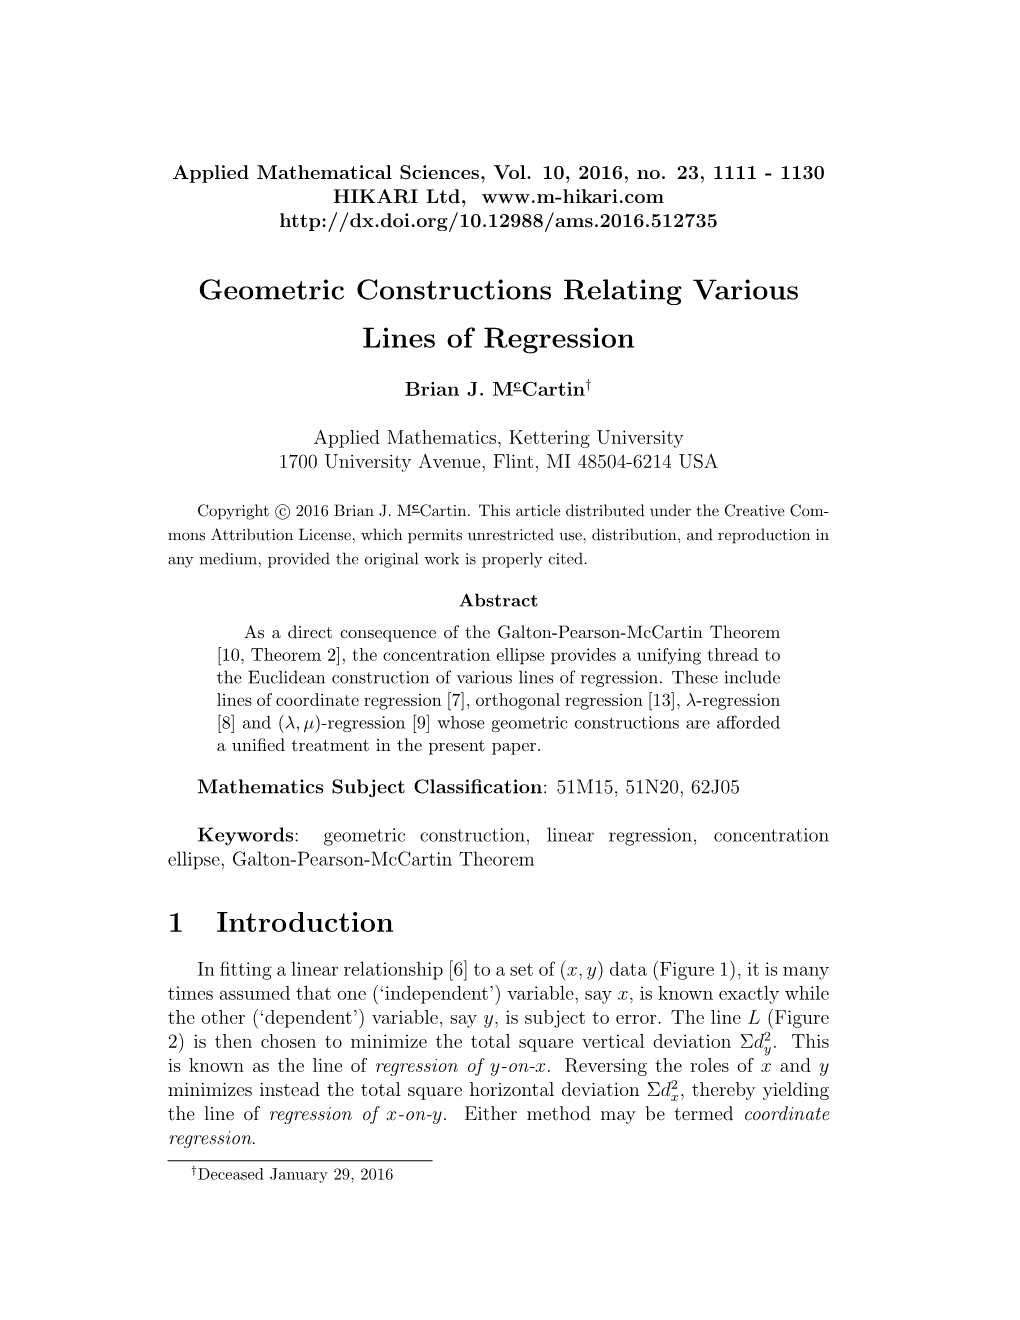 Geometric Constructions Relating Various Lines of Regression